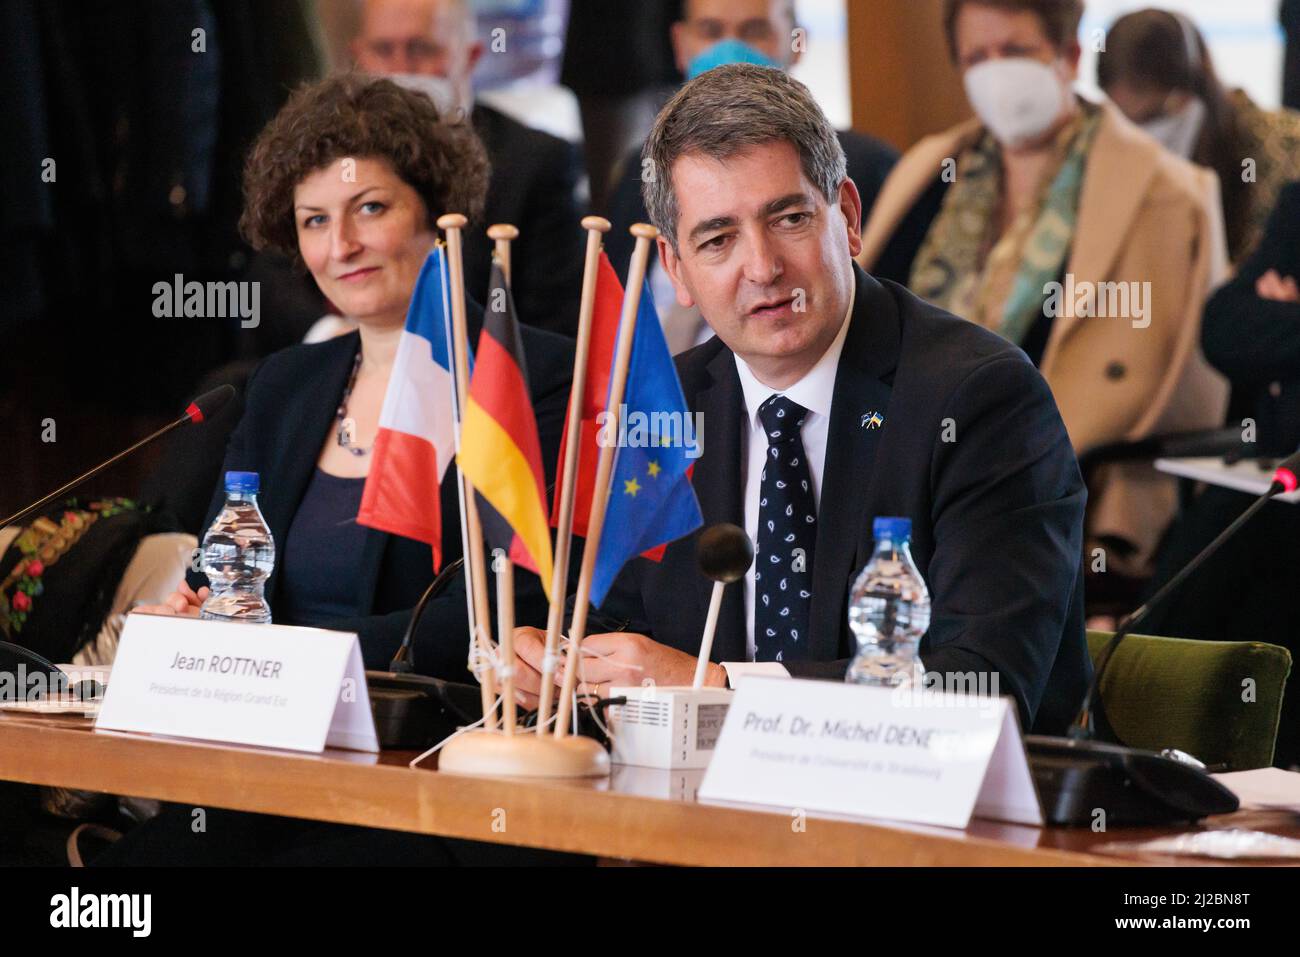 31 March 2022, France, Straßburg: Jeanne Barseghian (Europe Écologie-Les Verts, l.), mayor of Strasbourg, and Jean Rottner (Les Républicains, r), sit in a building at the University of Strasbourg during a conference on the EUCOR university network as part of a visit by a delegation from the Baden-Württemberg state government. Kretschmann has traveled to Strasbourg for political talks, where he hopes to strengthen relations with his French neighbor. Photo: Philipp von Ditfurth/dpa Stock Photo